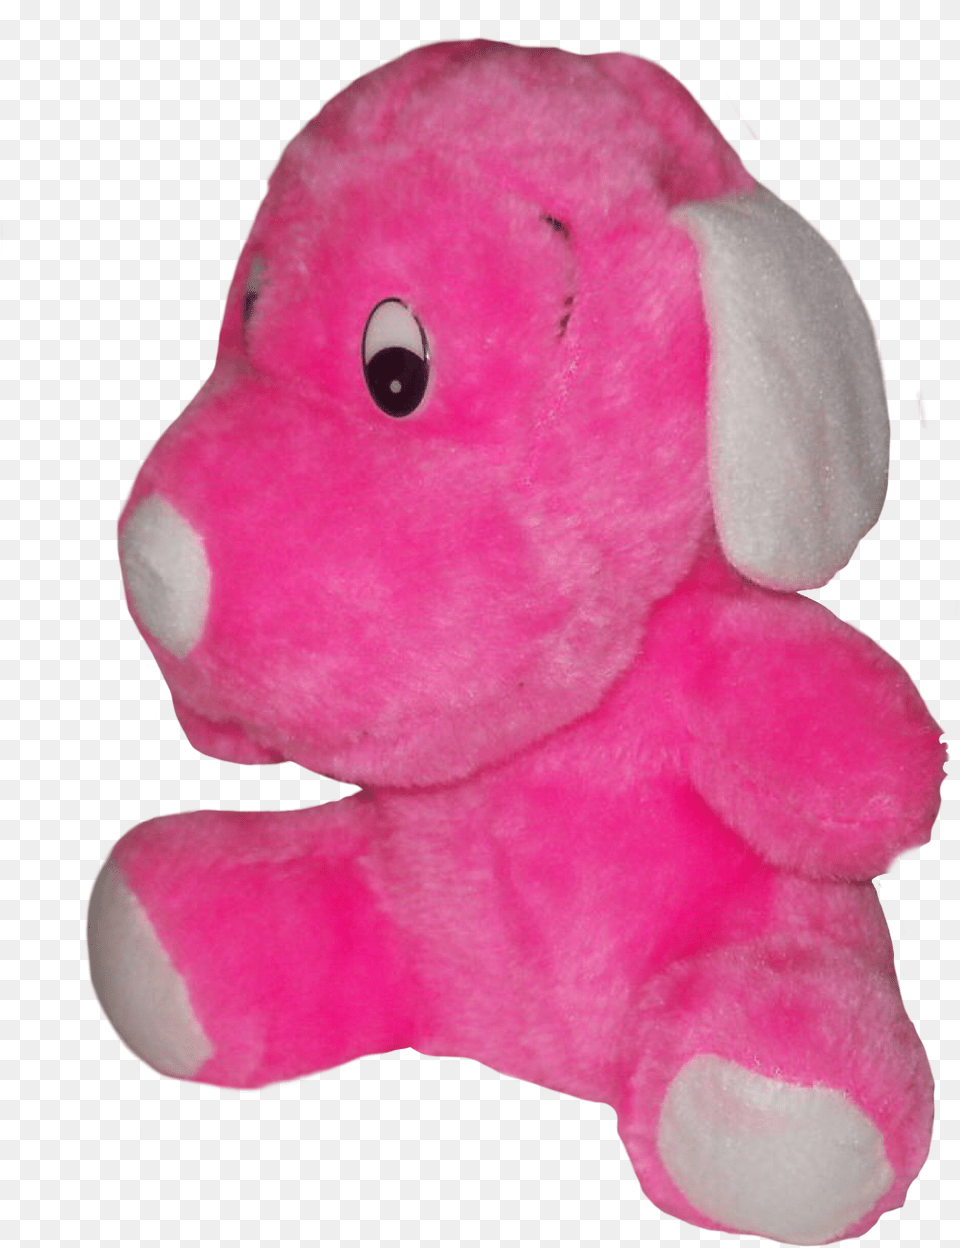 Toy Toycore Kidcore Pink Love Lovecore Babycore Stuffed Toy, Plush, Teddy Bear Free Transparent Png